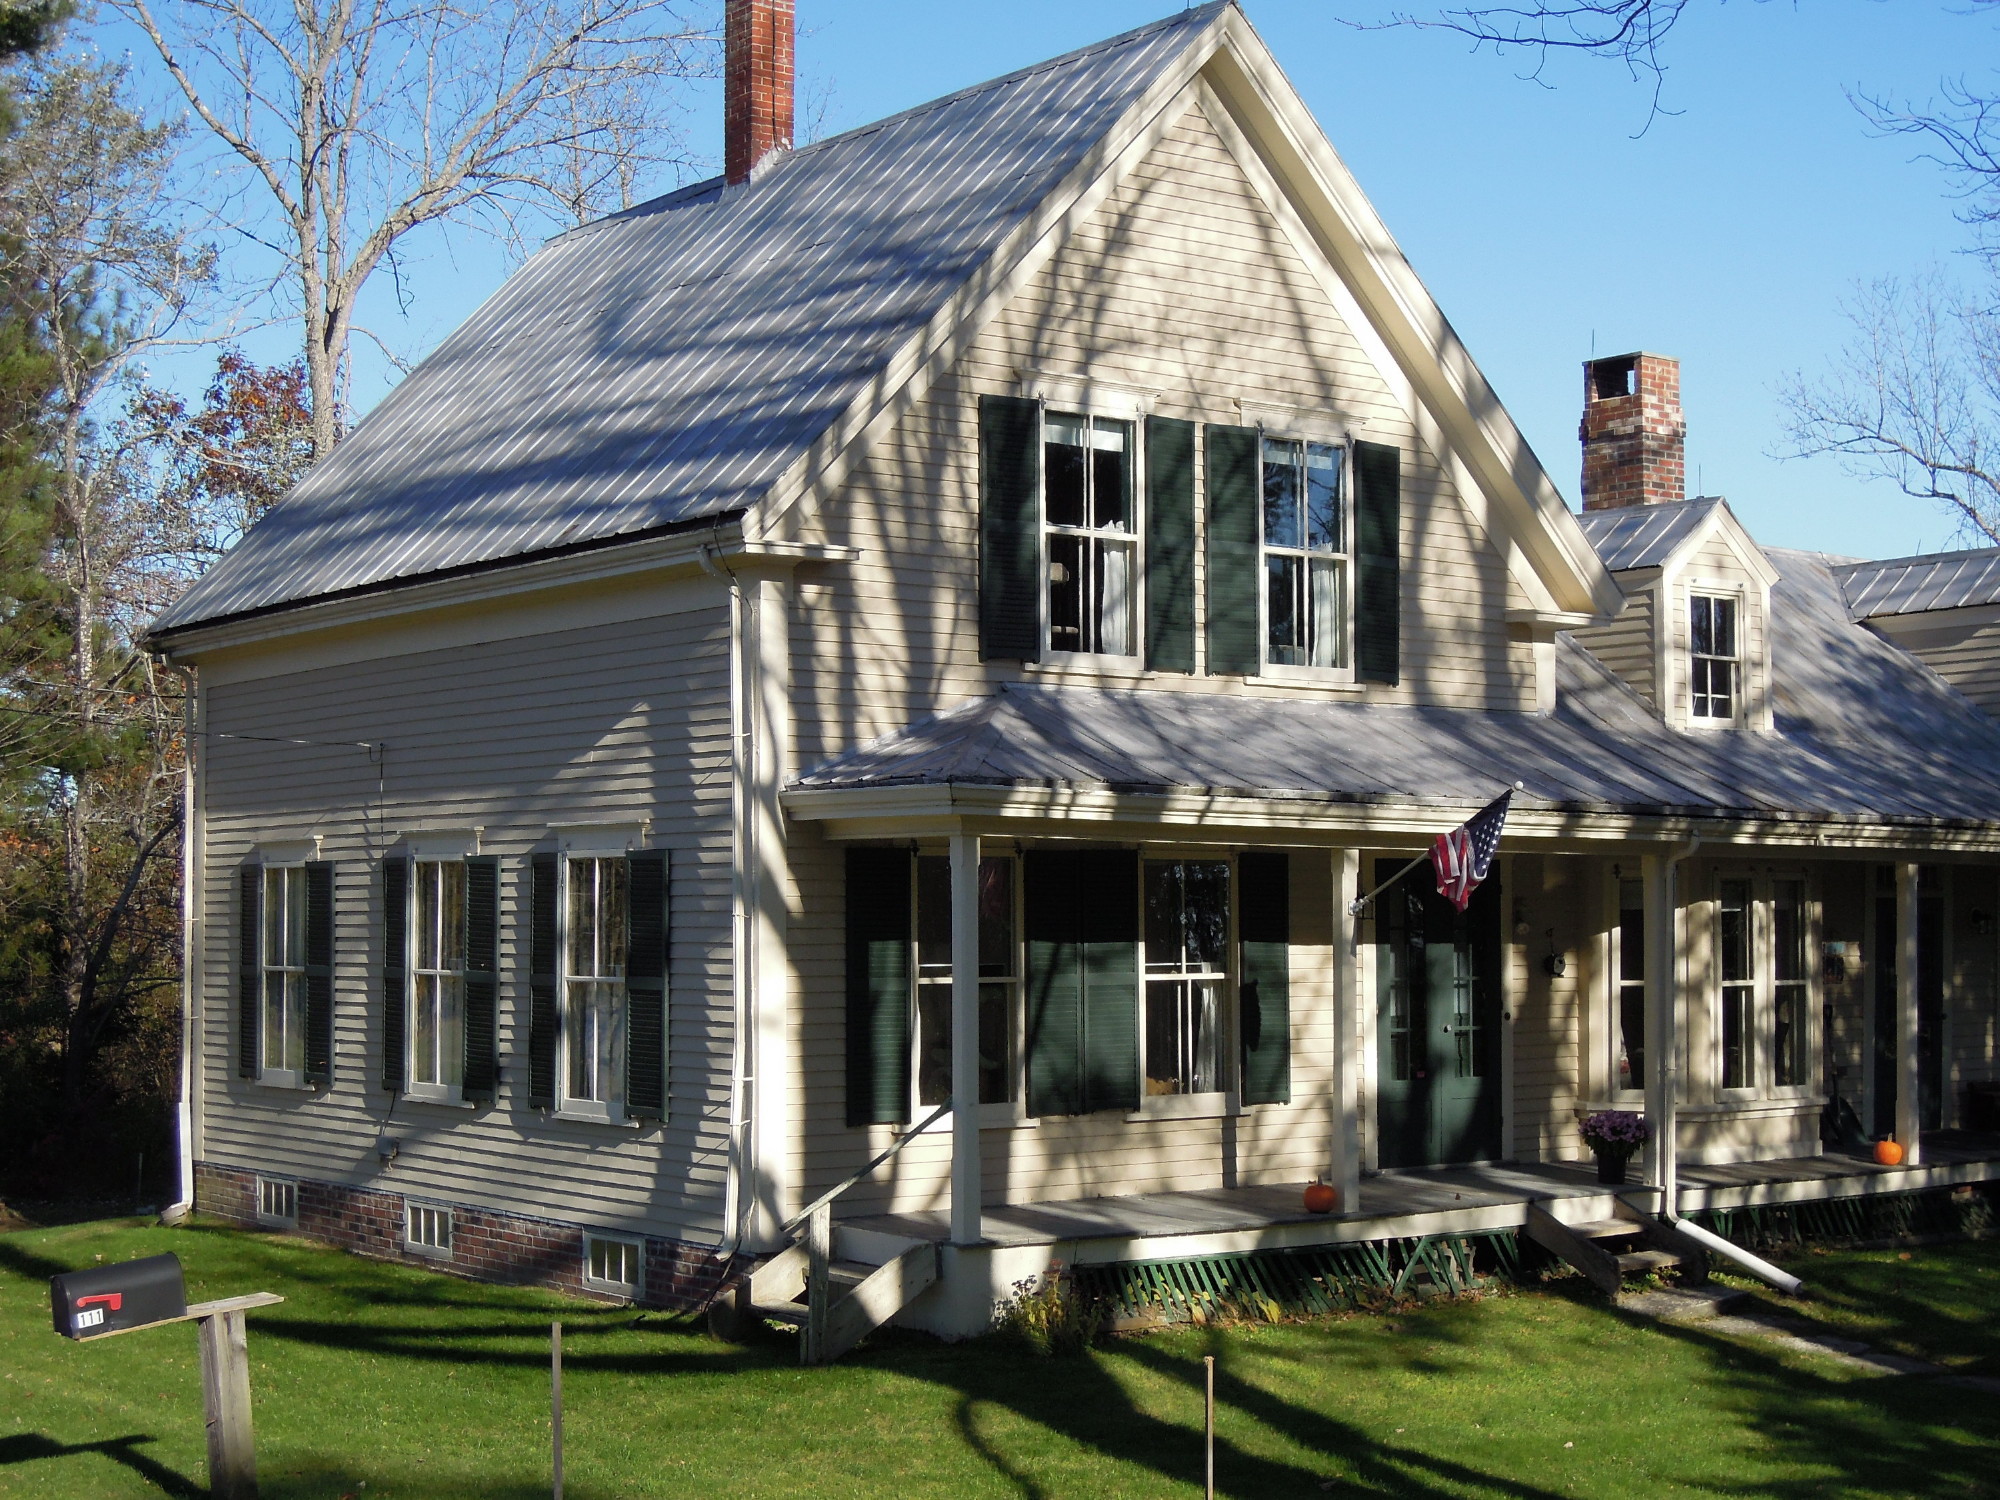  This home, circa 1930, needed a new roof to replace an old and failing tin roof. 